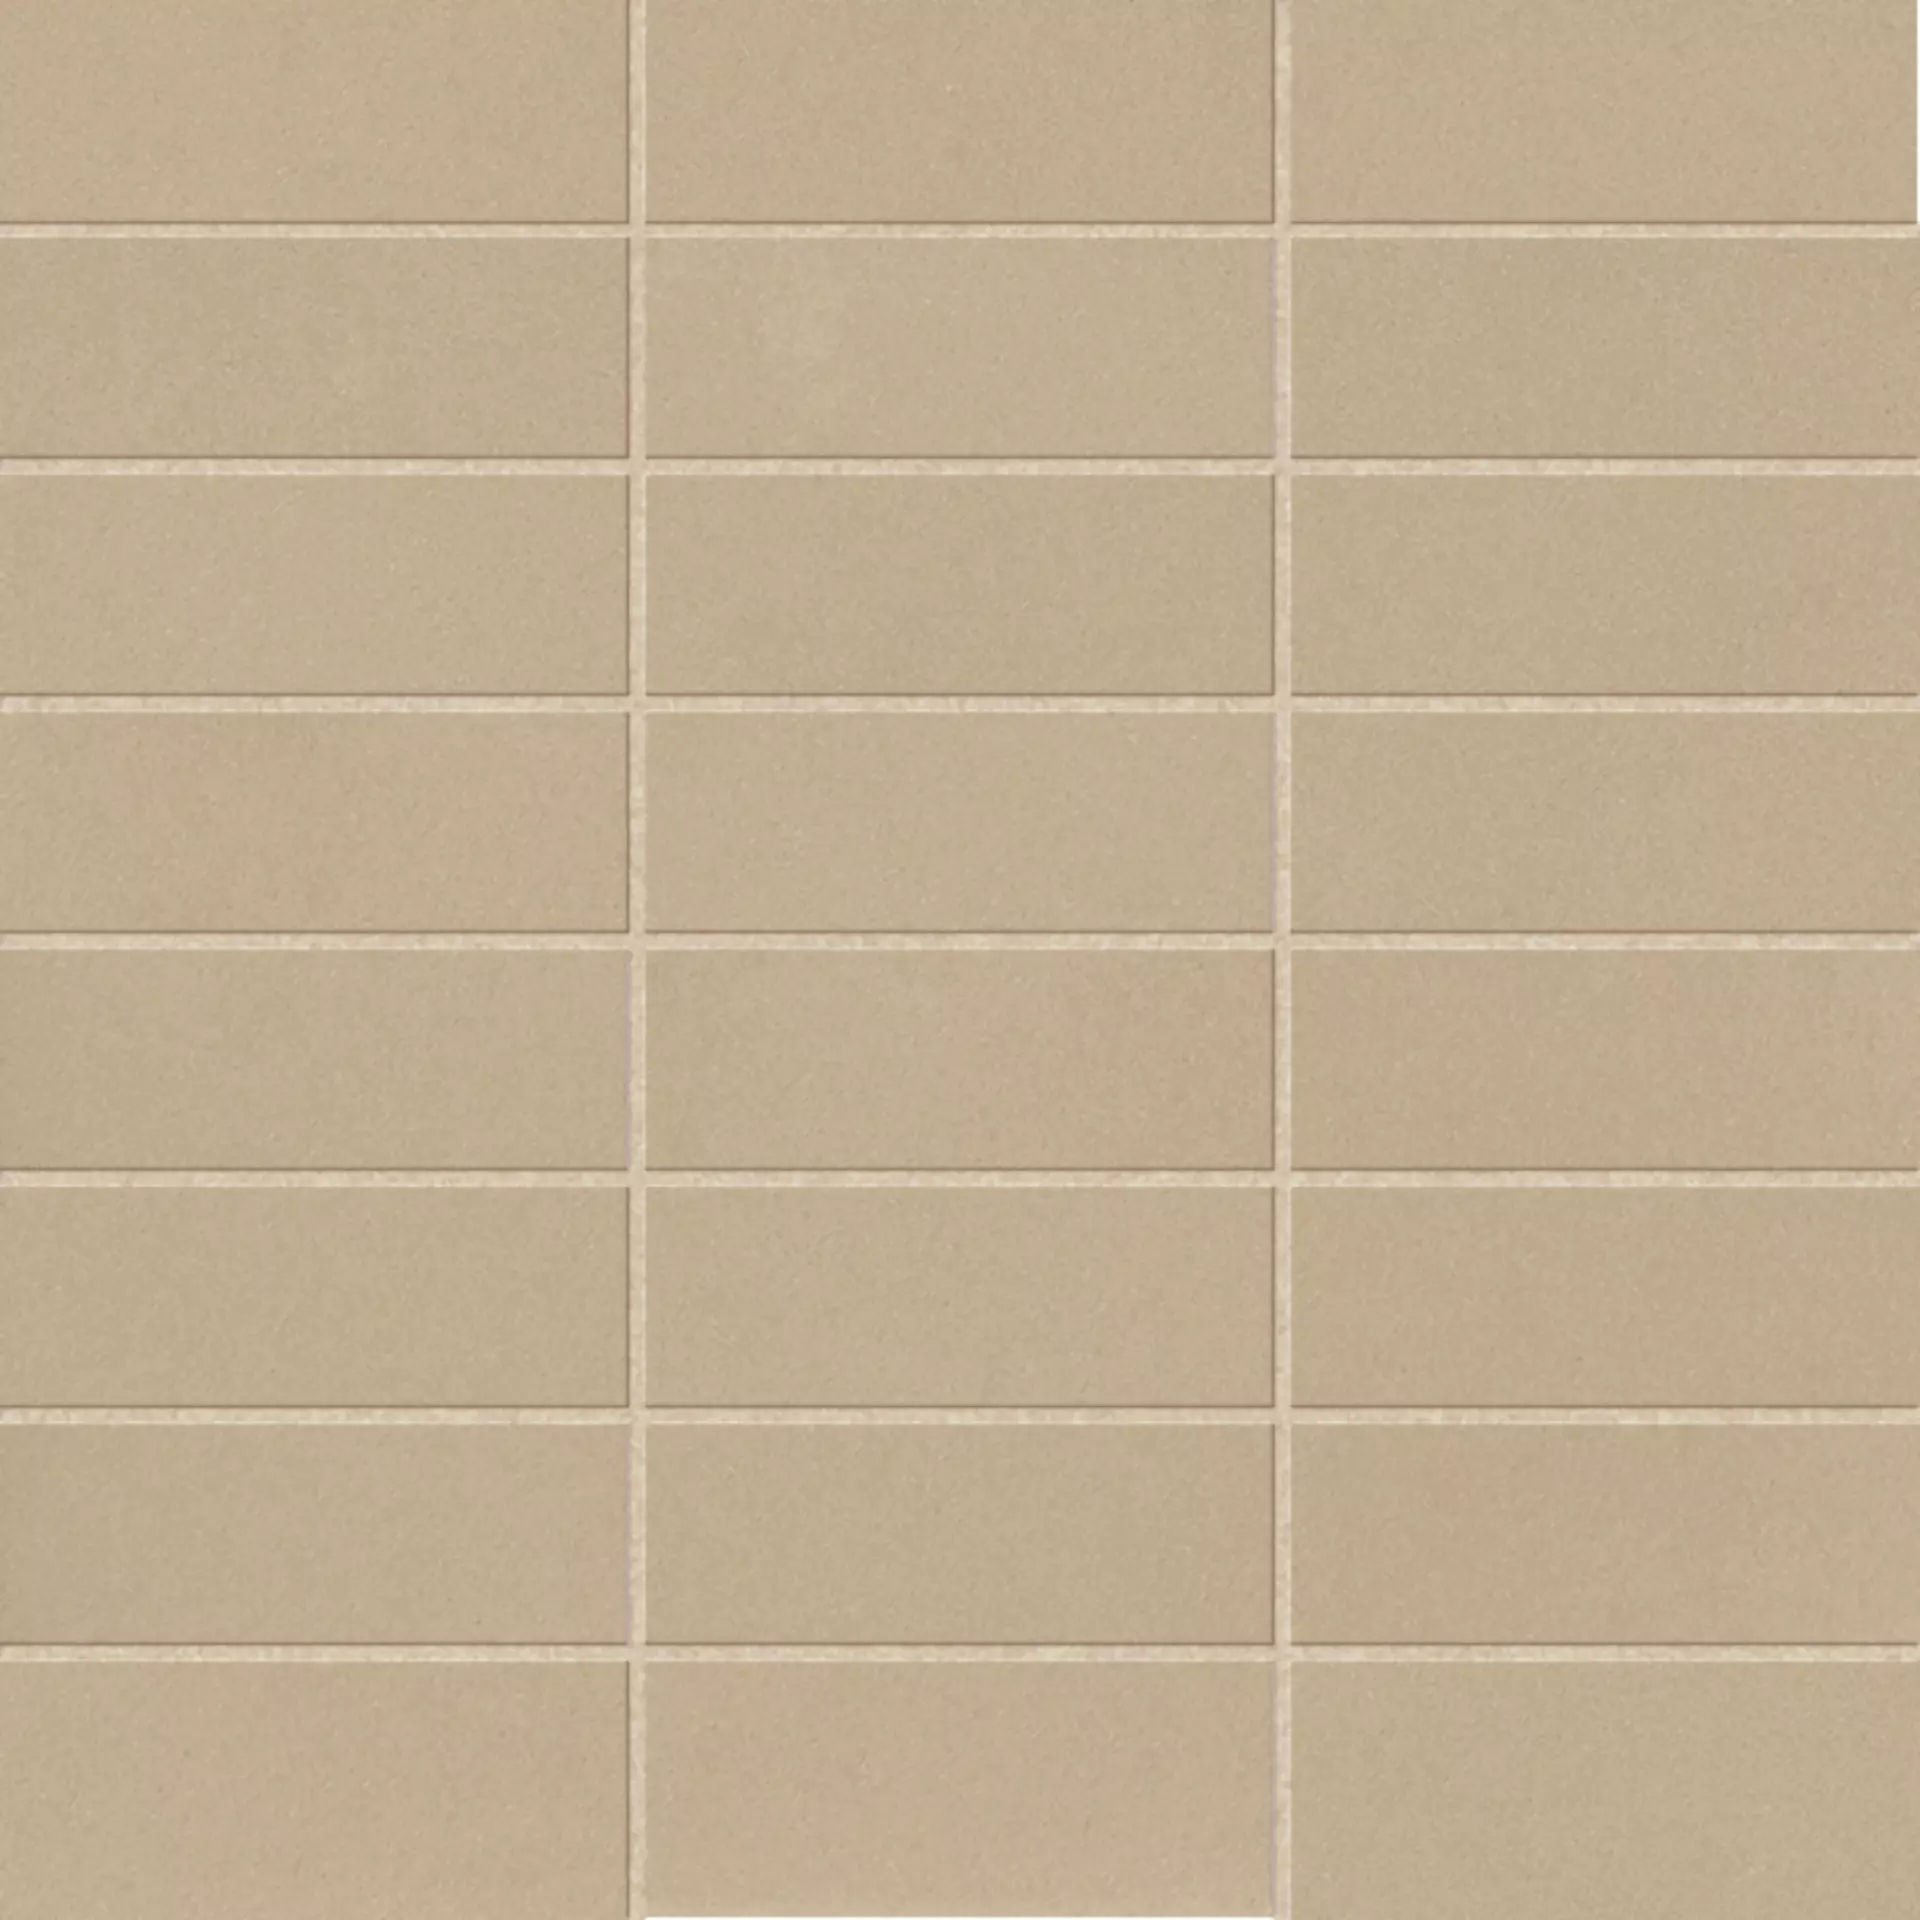 Margres Time 2.0 Beige Natural Mosaic 3,5x10 B25M310T24BF 30x30cm rectified 10,5mm